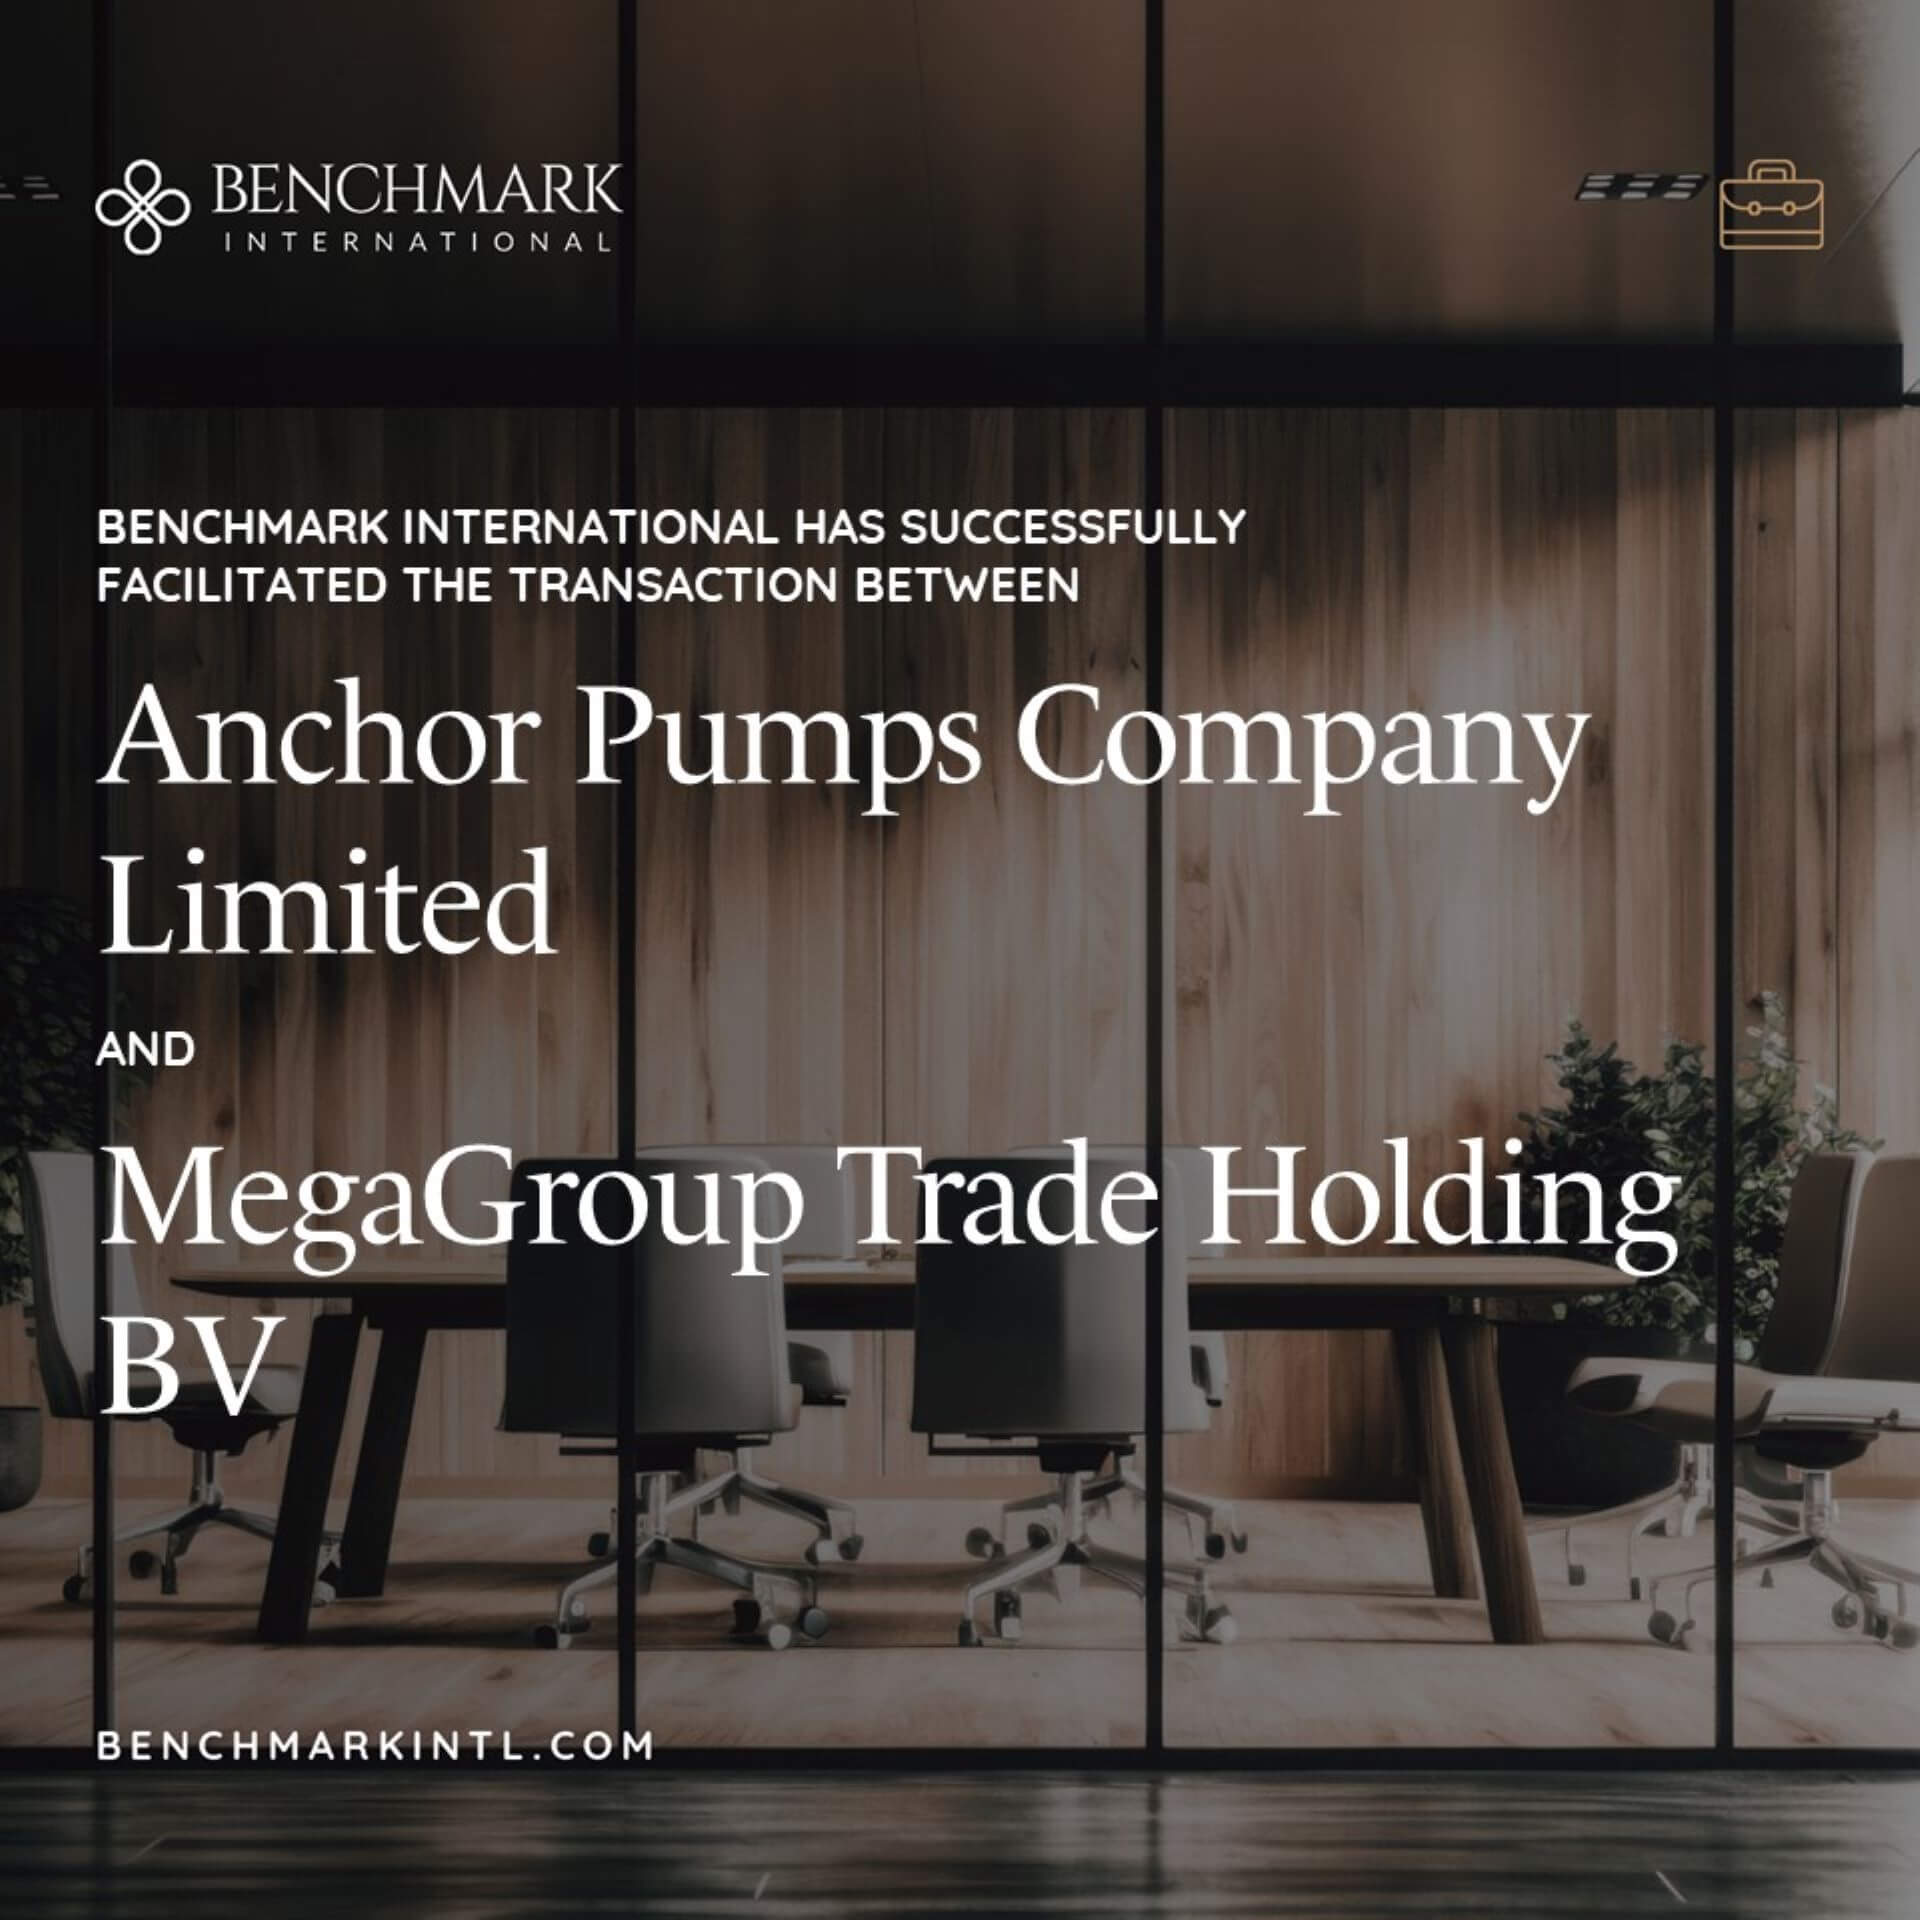 Anchor Pumps acquired by MegaGroup